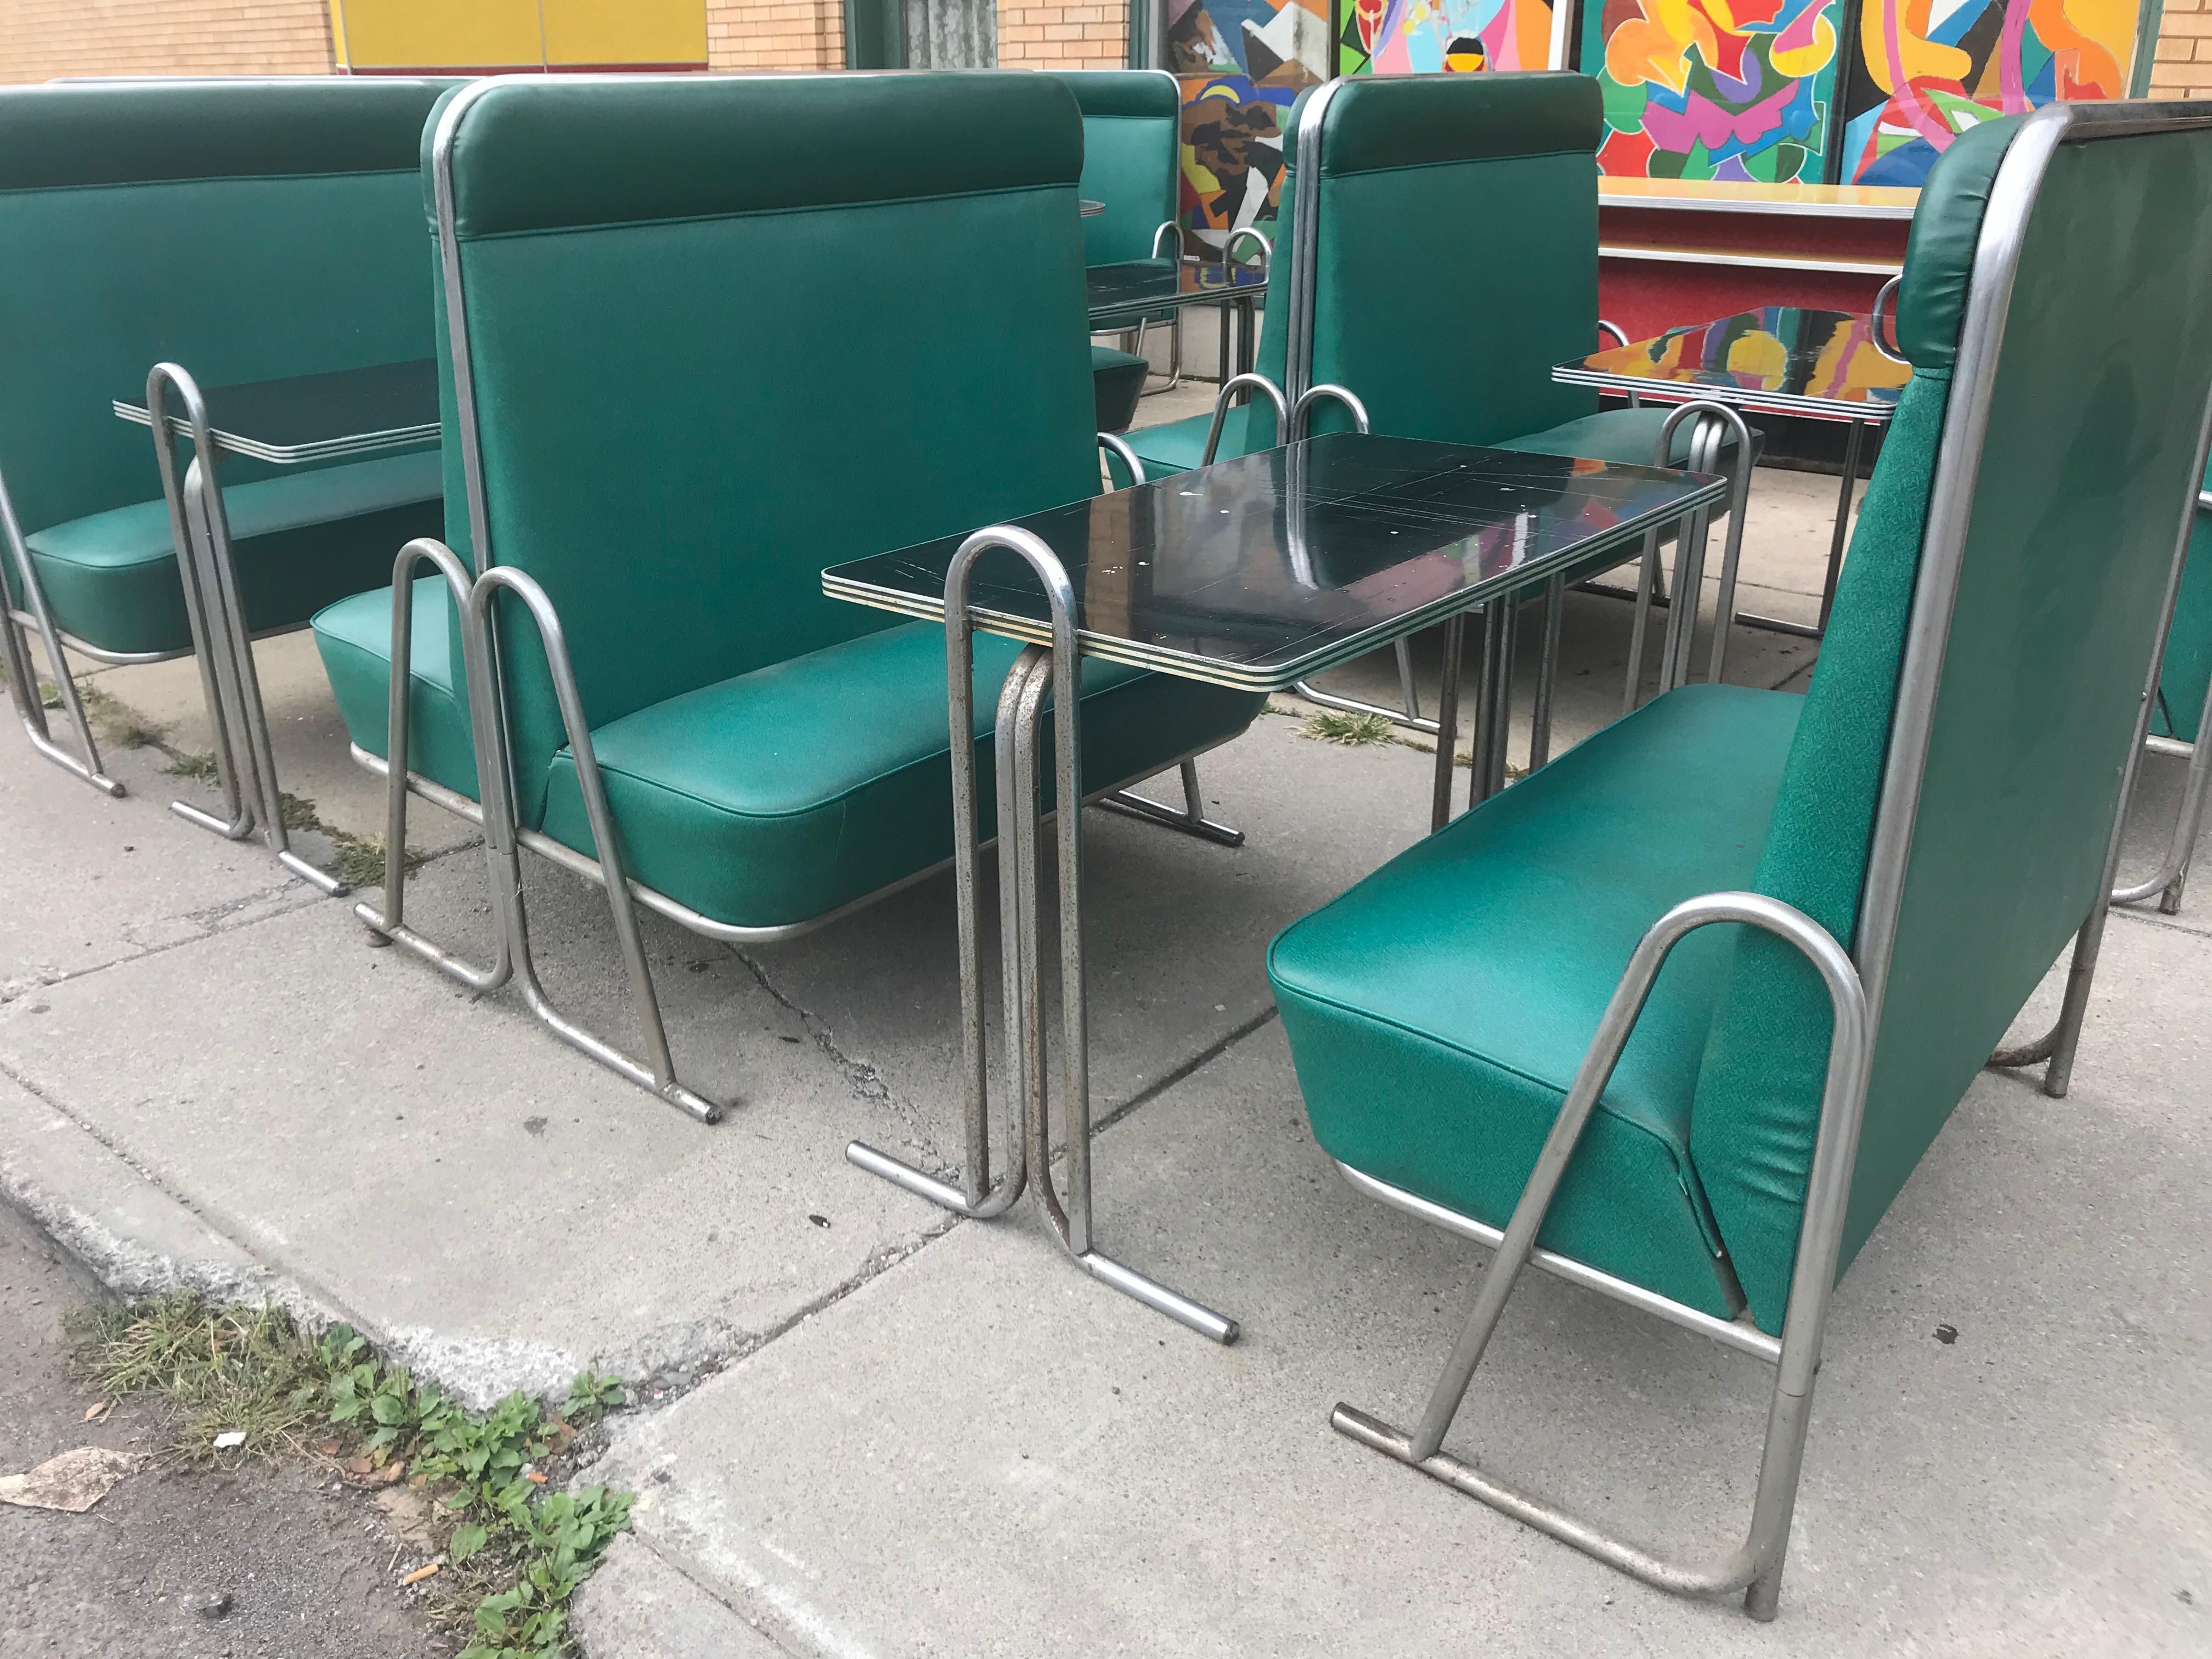 American Original Art Deco Diner, Seats 40 Designed by Wolfgang Hoffmann for Howell 1930s